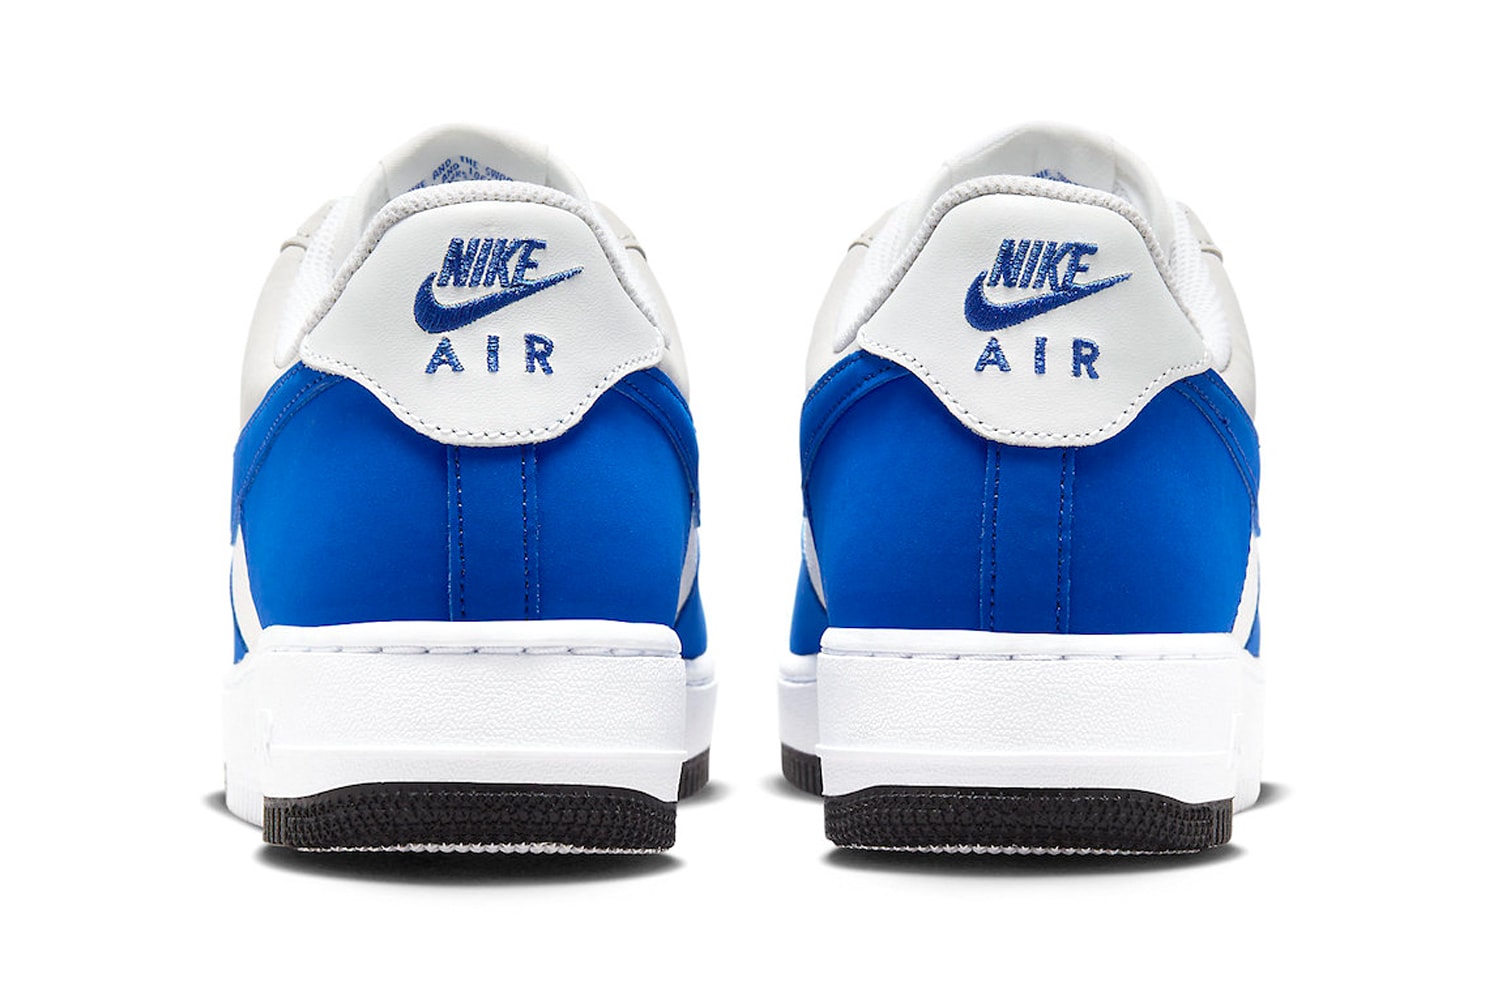 Nike Air Force 1 Low Timeless Official Look Release Info FJ5471-121 Date Buy Price Summit White Game Royal Neutral Grey Coconut Milk Black